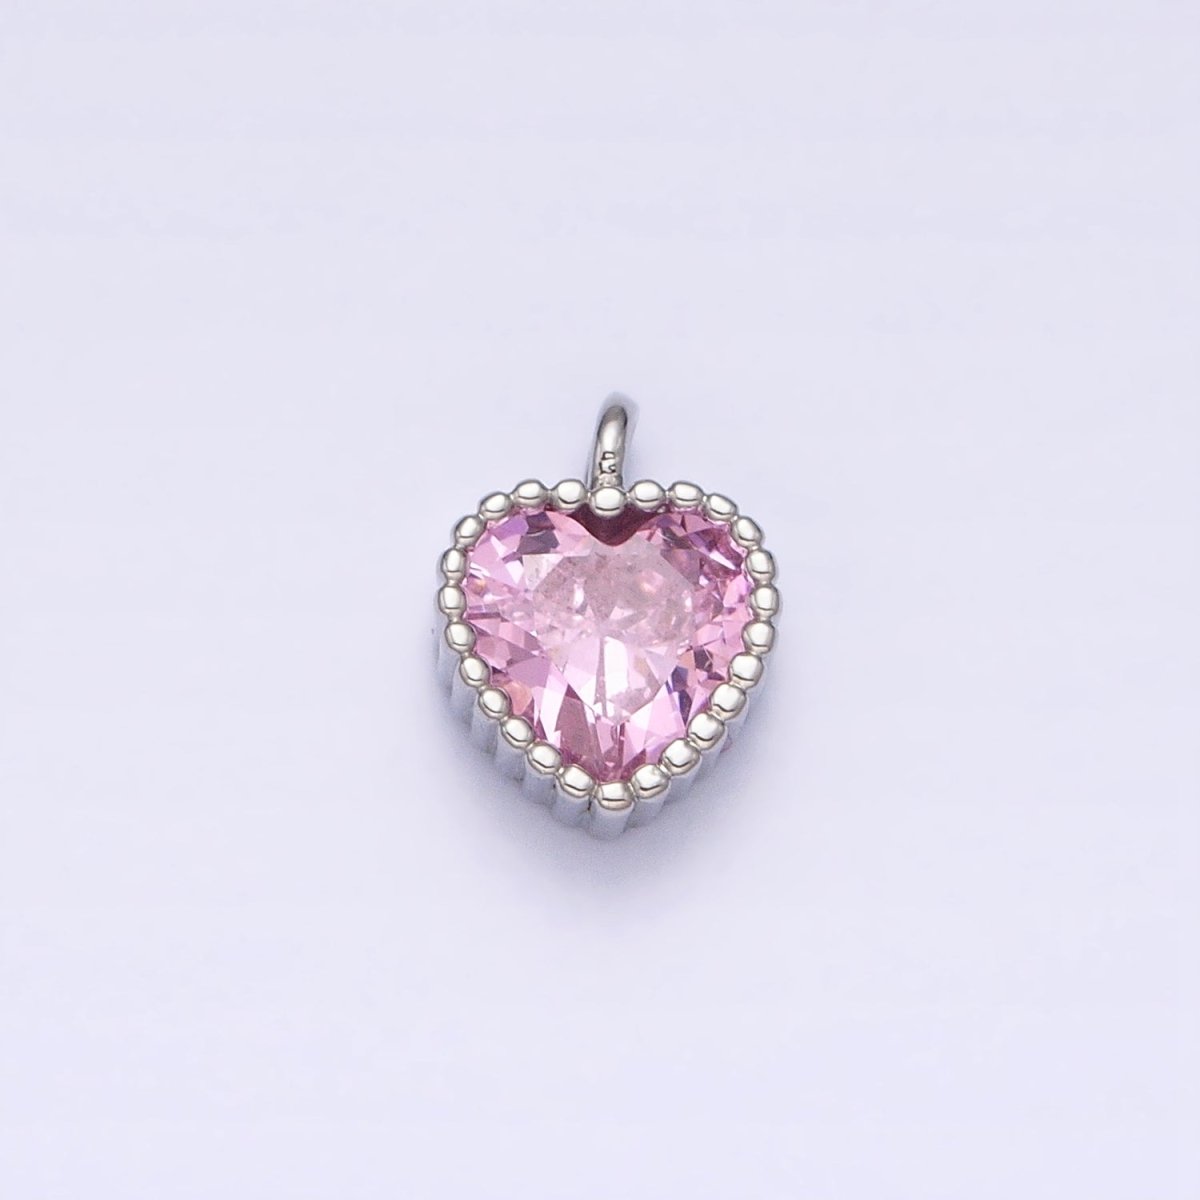 16K Gold Filled CZ Clear, Pink, Purple Mini Heart Add-On Charm in Gold & Silver | AC1258 - AC1263 - DLUXCA